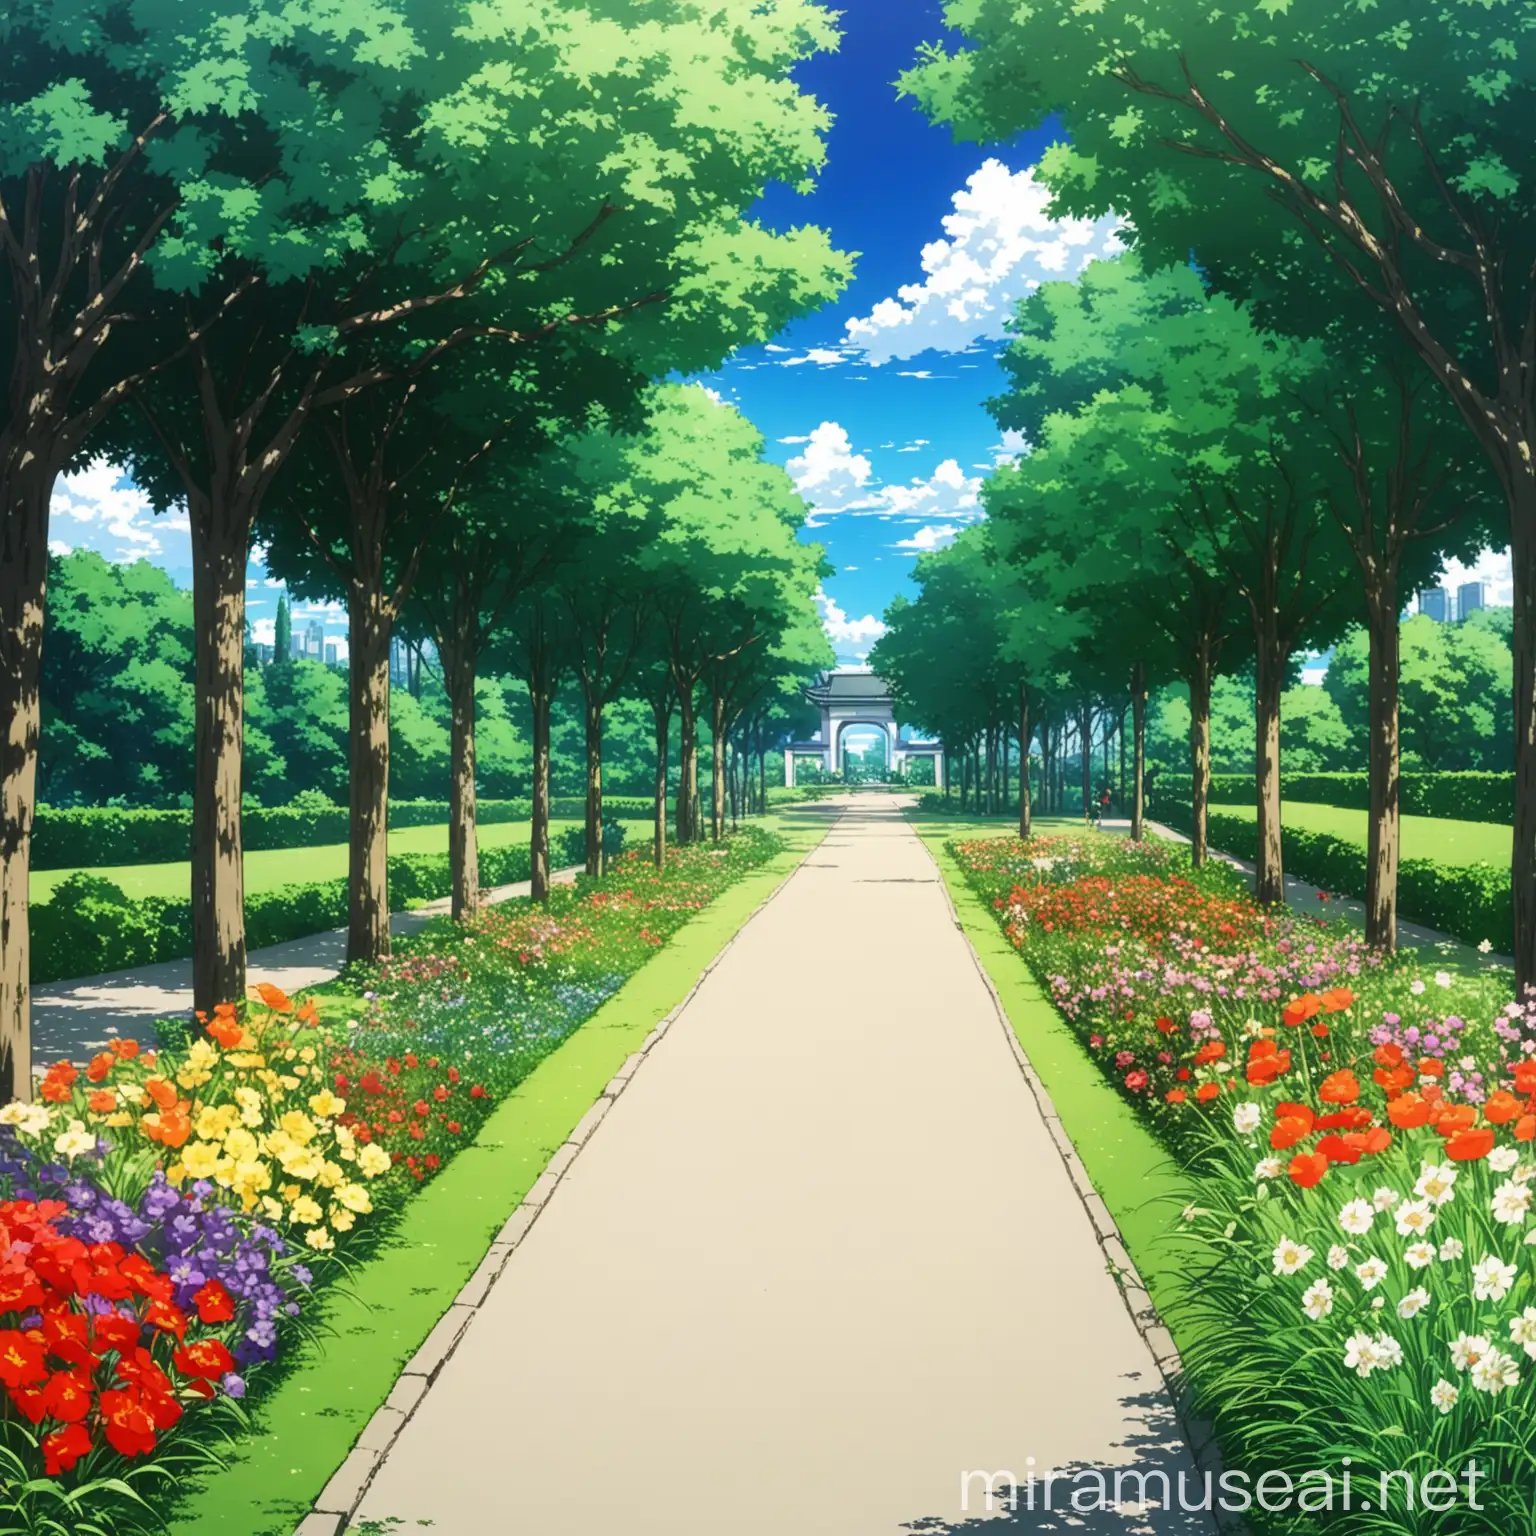 Put A Suitable Background Of A Beautiful Public Open Air Garden With A Wide Road Full Of Grass In Anime For This Picture